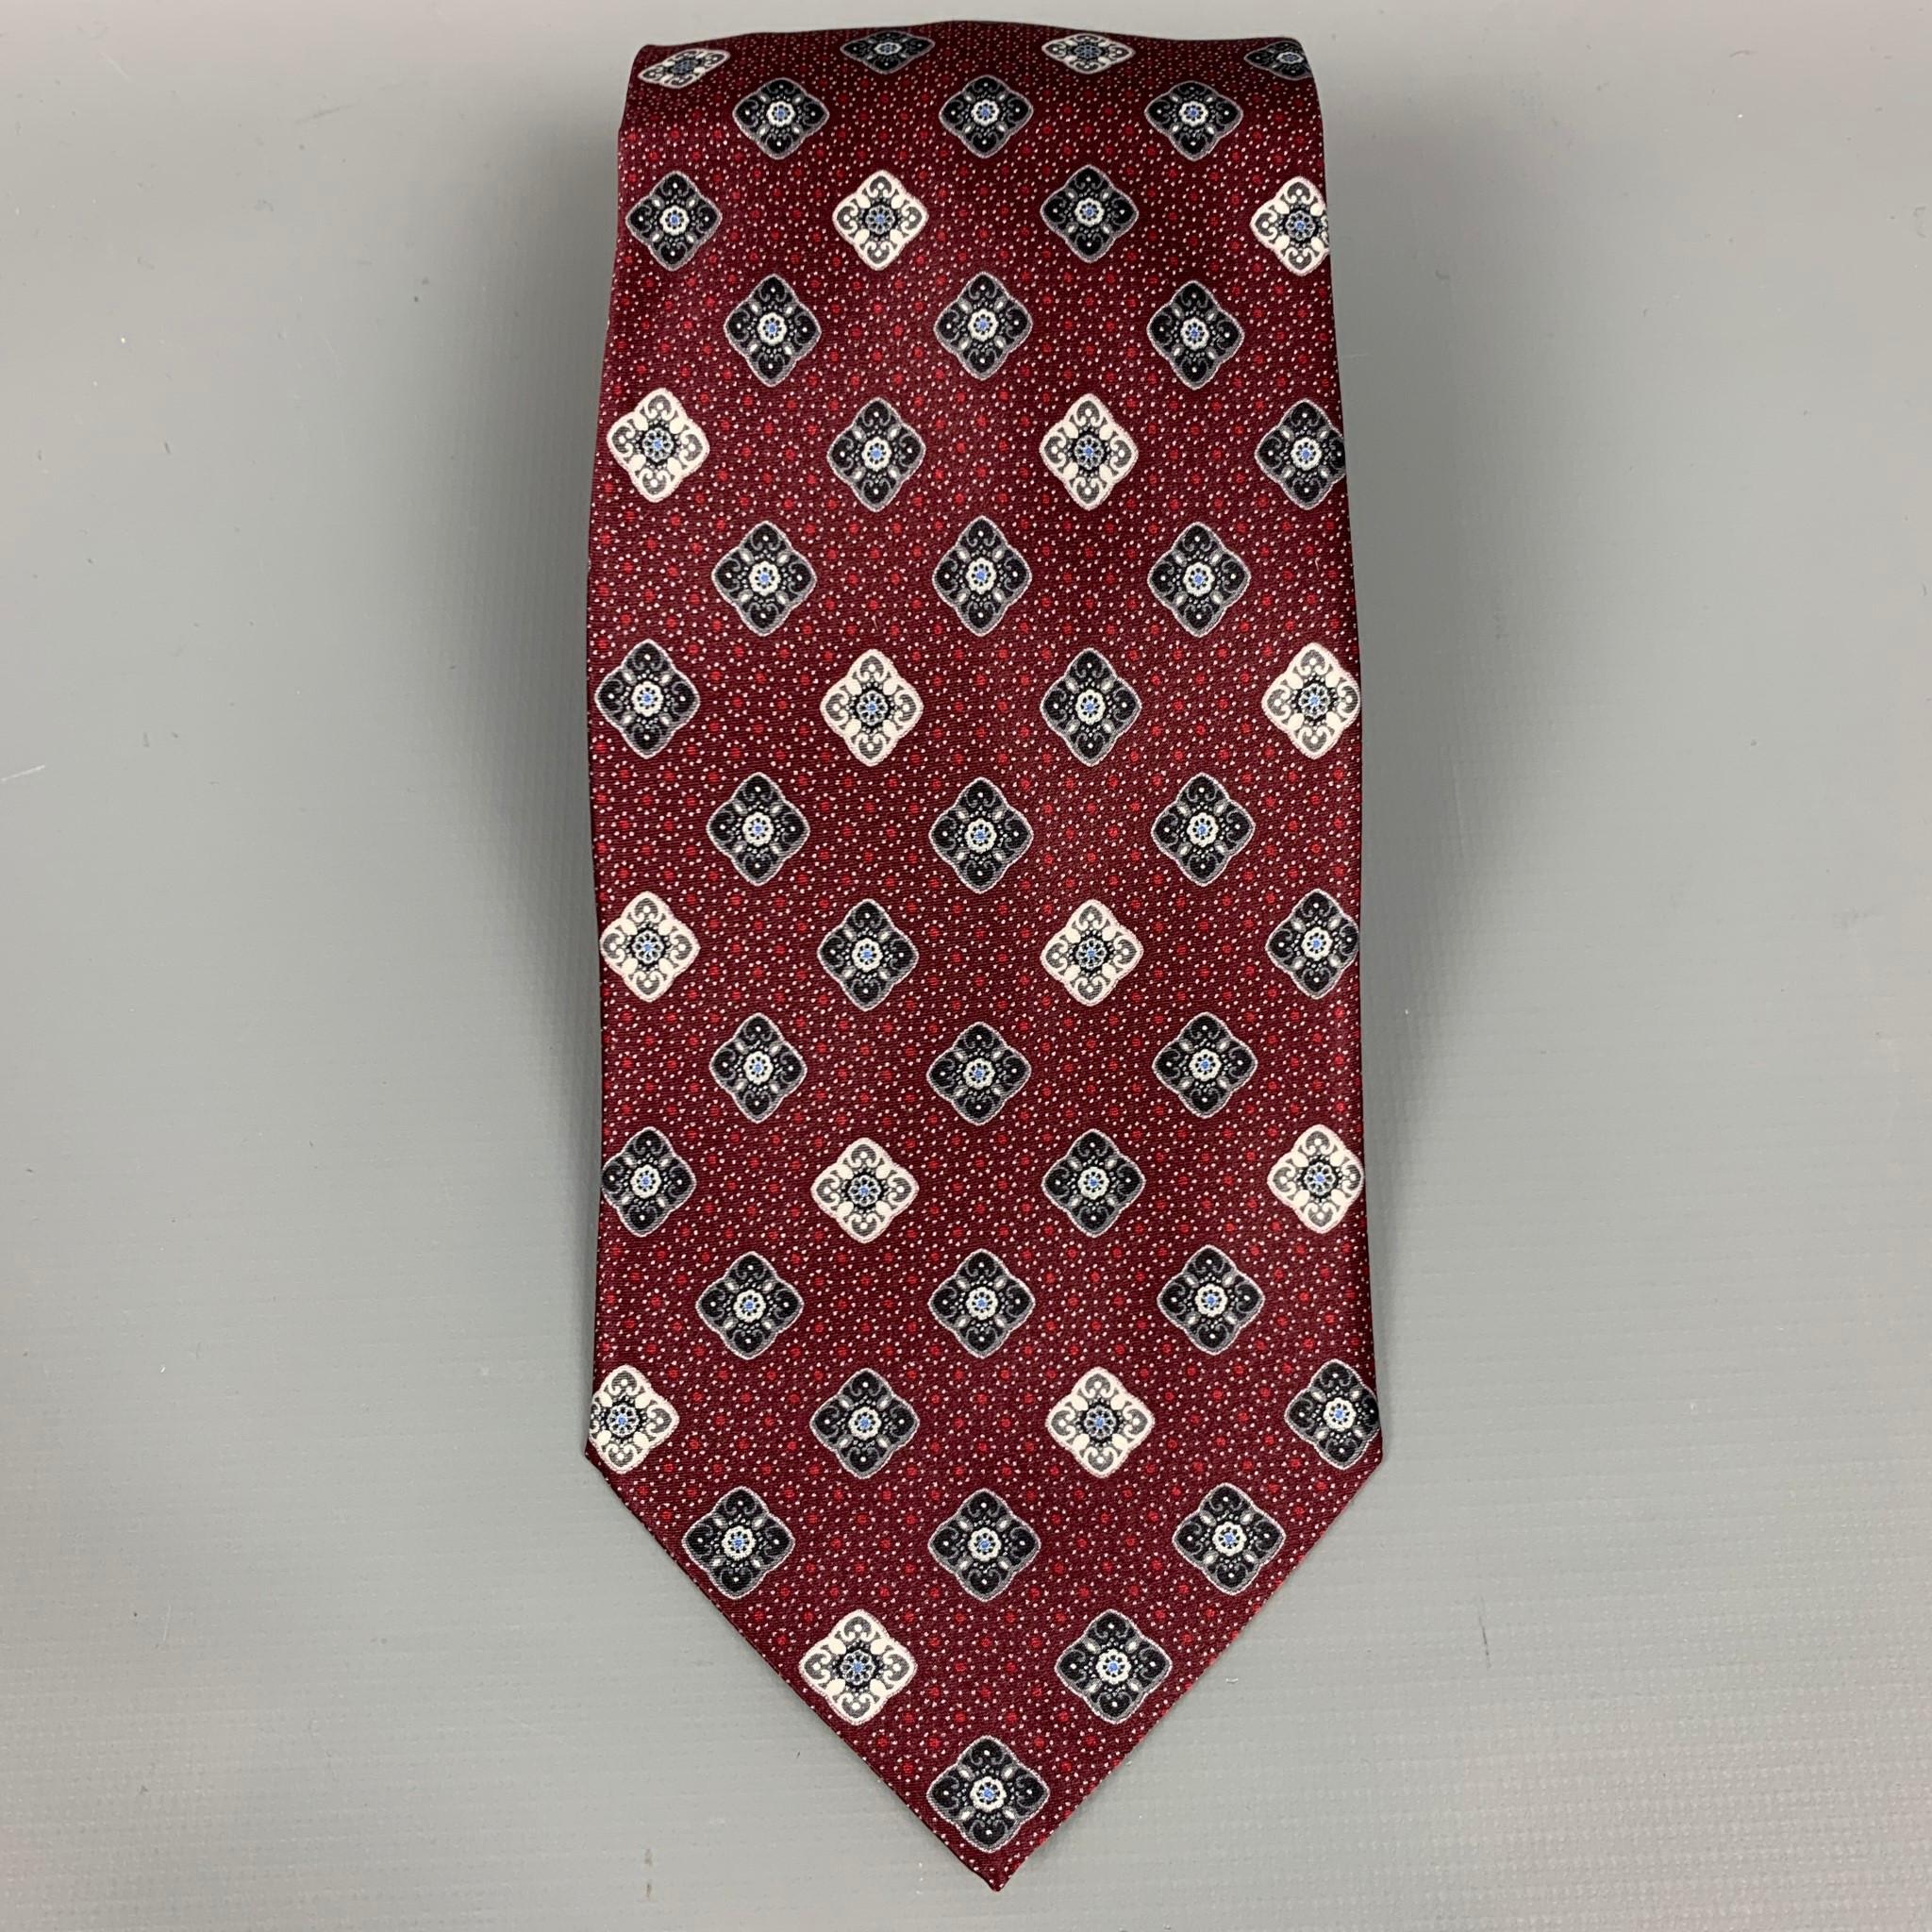 BRIONI neck tie comes in a burgundy & silver print silk. Made in Italy.

Very Good Pre-Owned Condition.

Measurements:

Width: 3.5 in.  